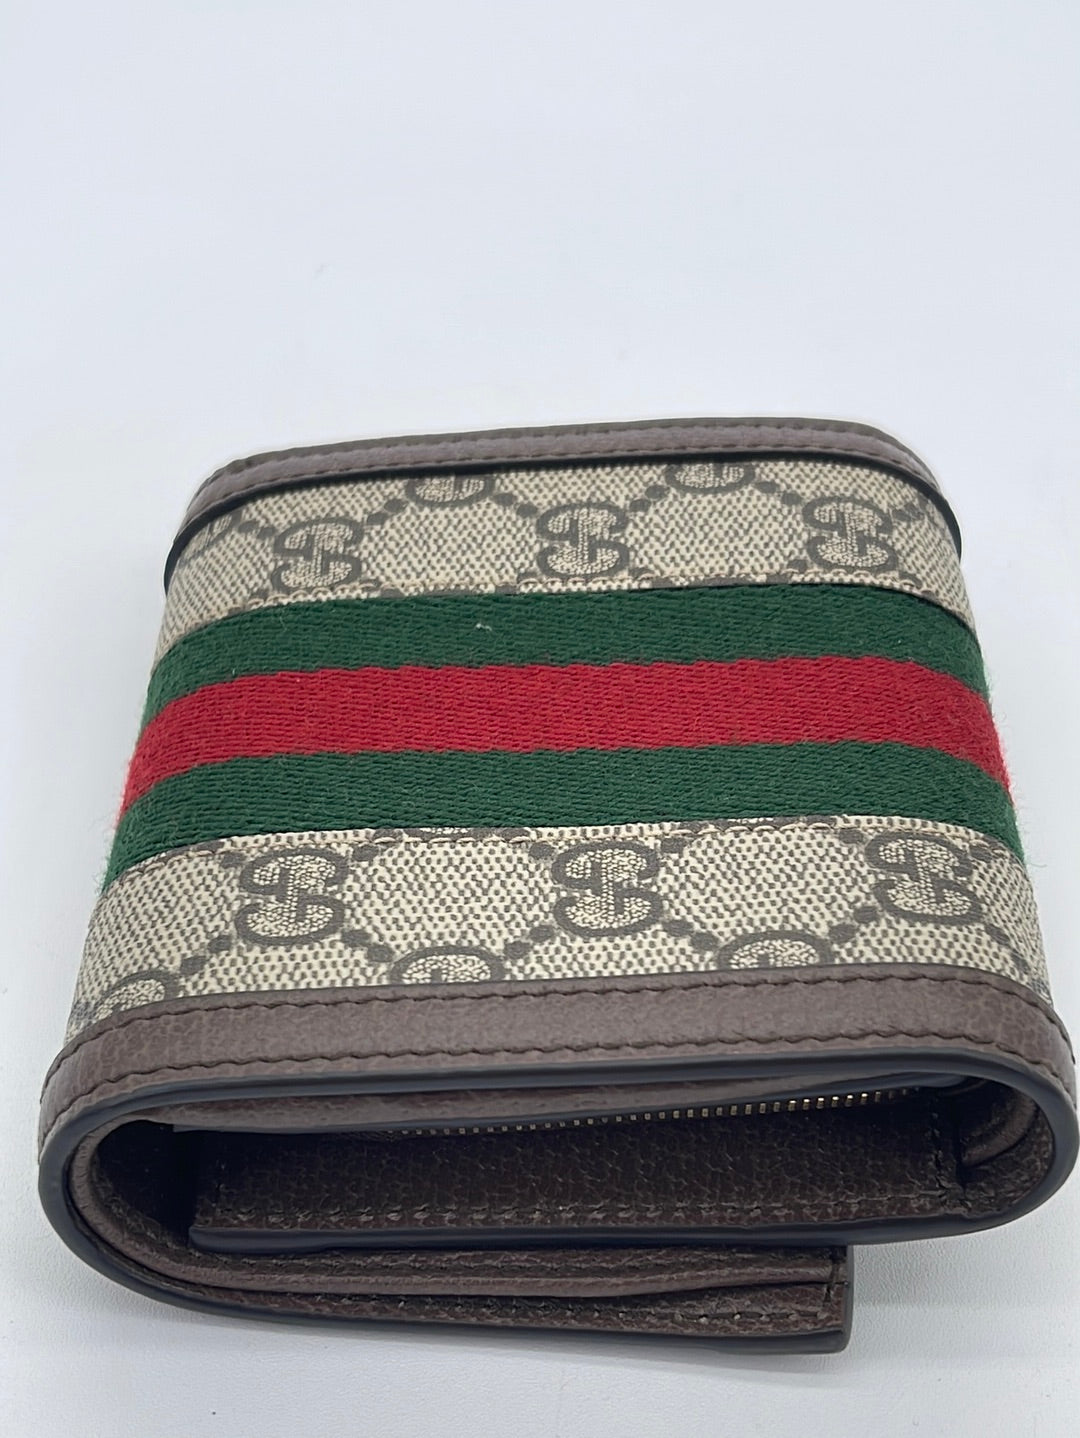 Preloved Gucci Supreme GG Ophidia Card Case Wallet 5986622184 063023